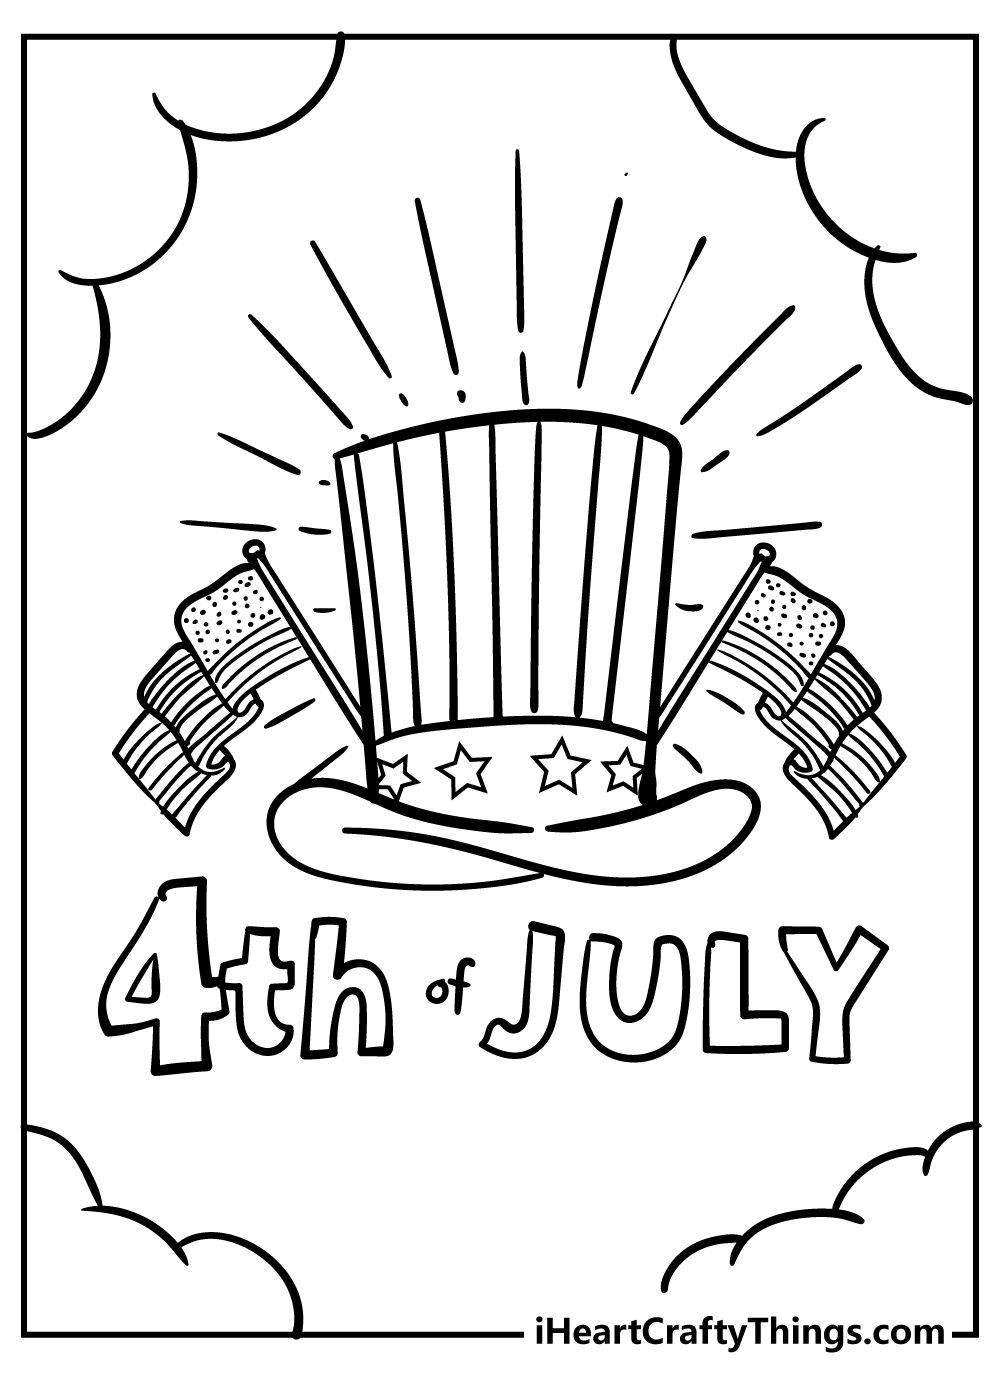 Celebrate Freedom with 4th of July: 180+ Free Coloring Pages 93